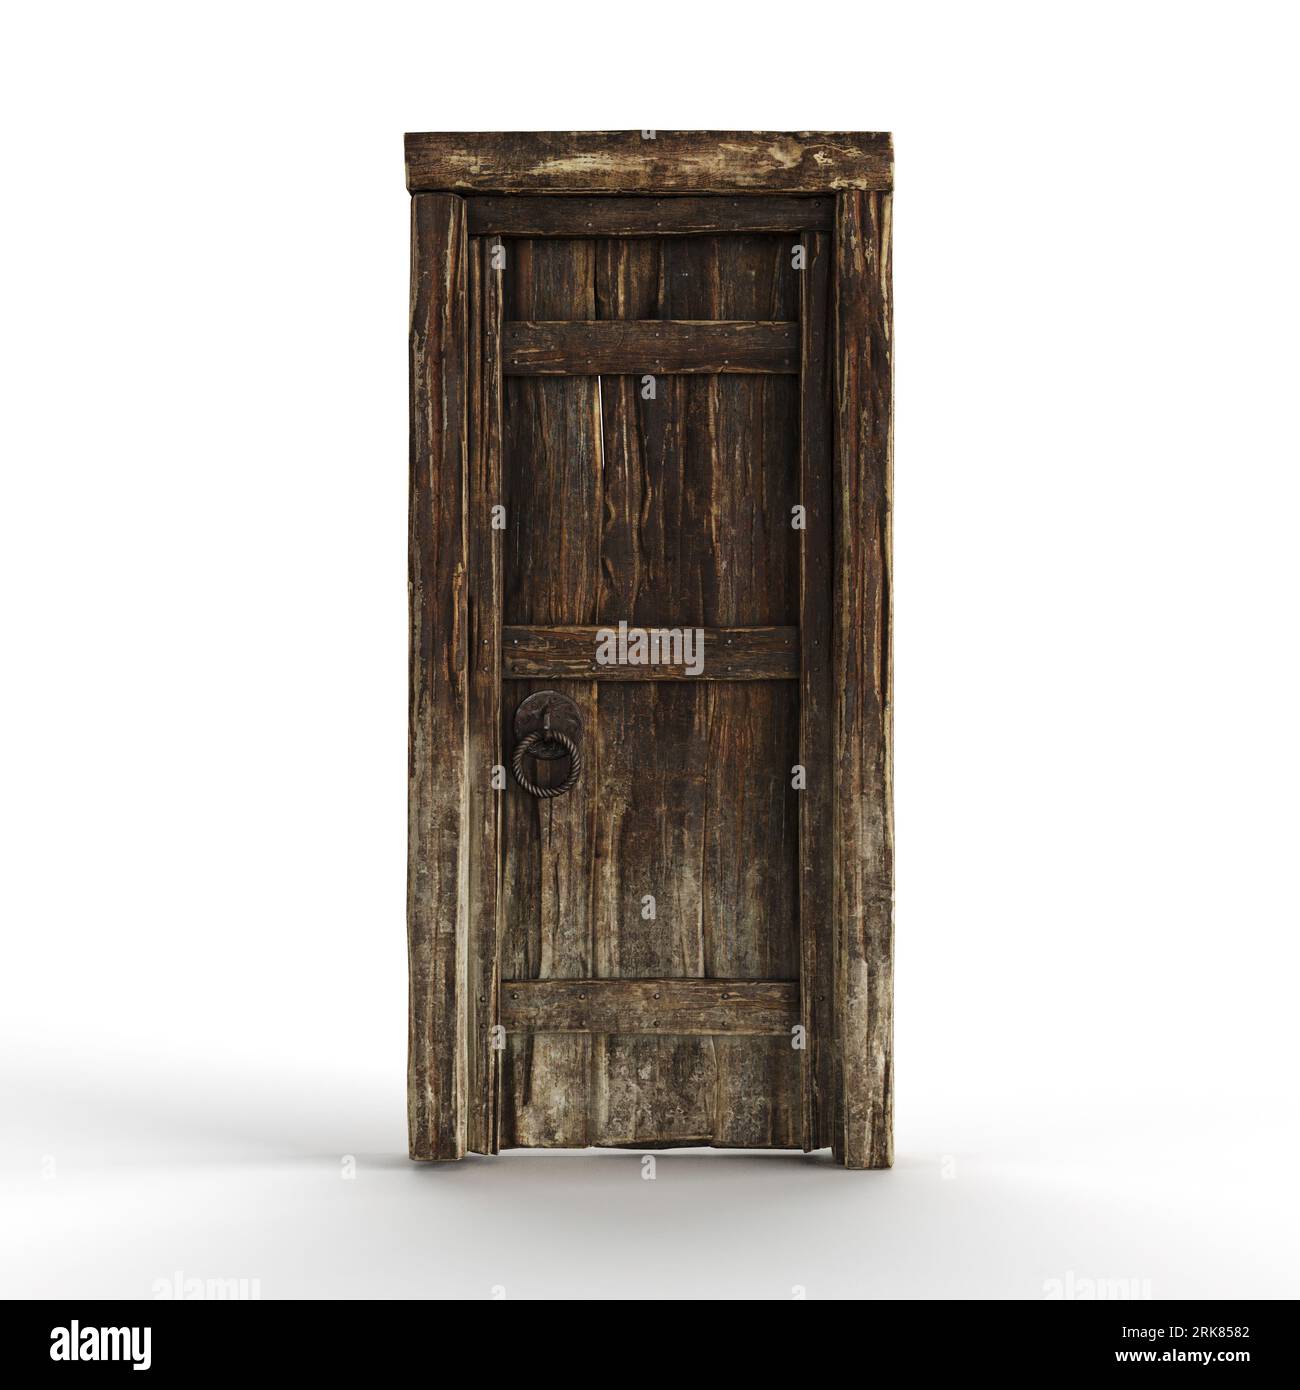 A 3D illustration of an old wooden door on a white background Stock Photo